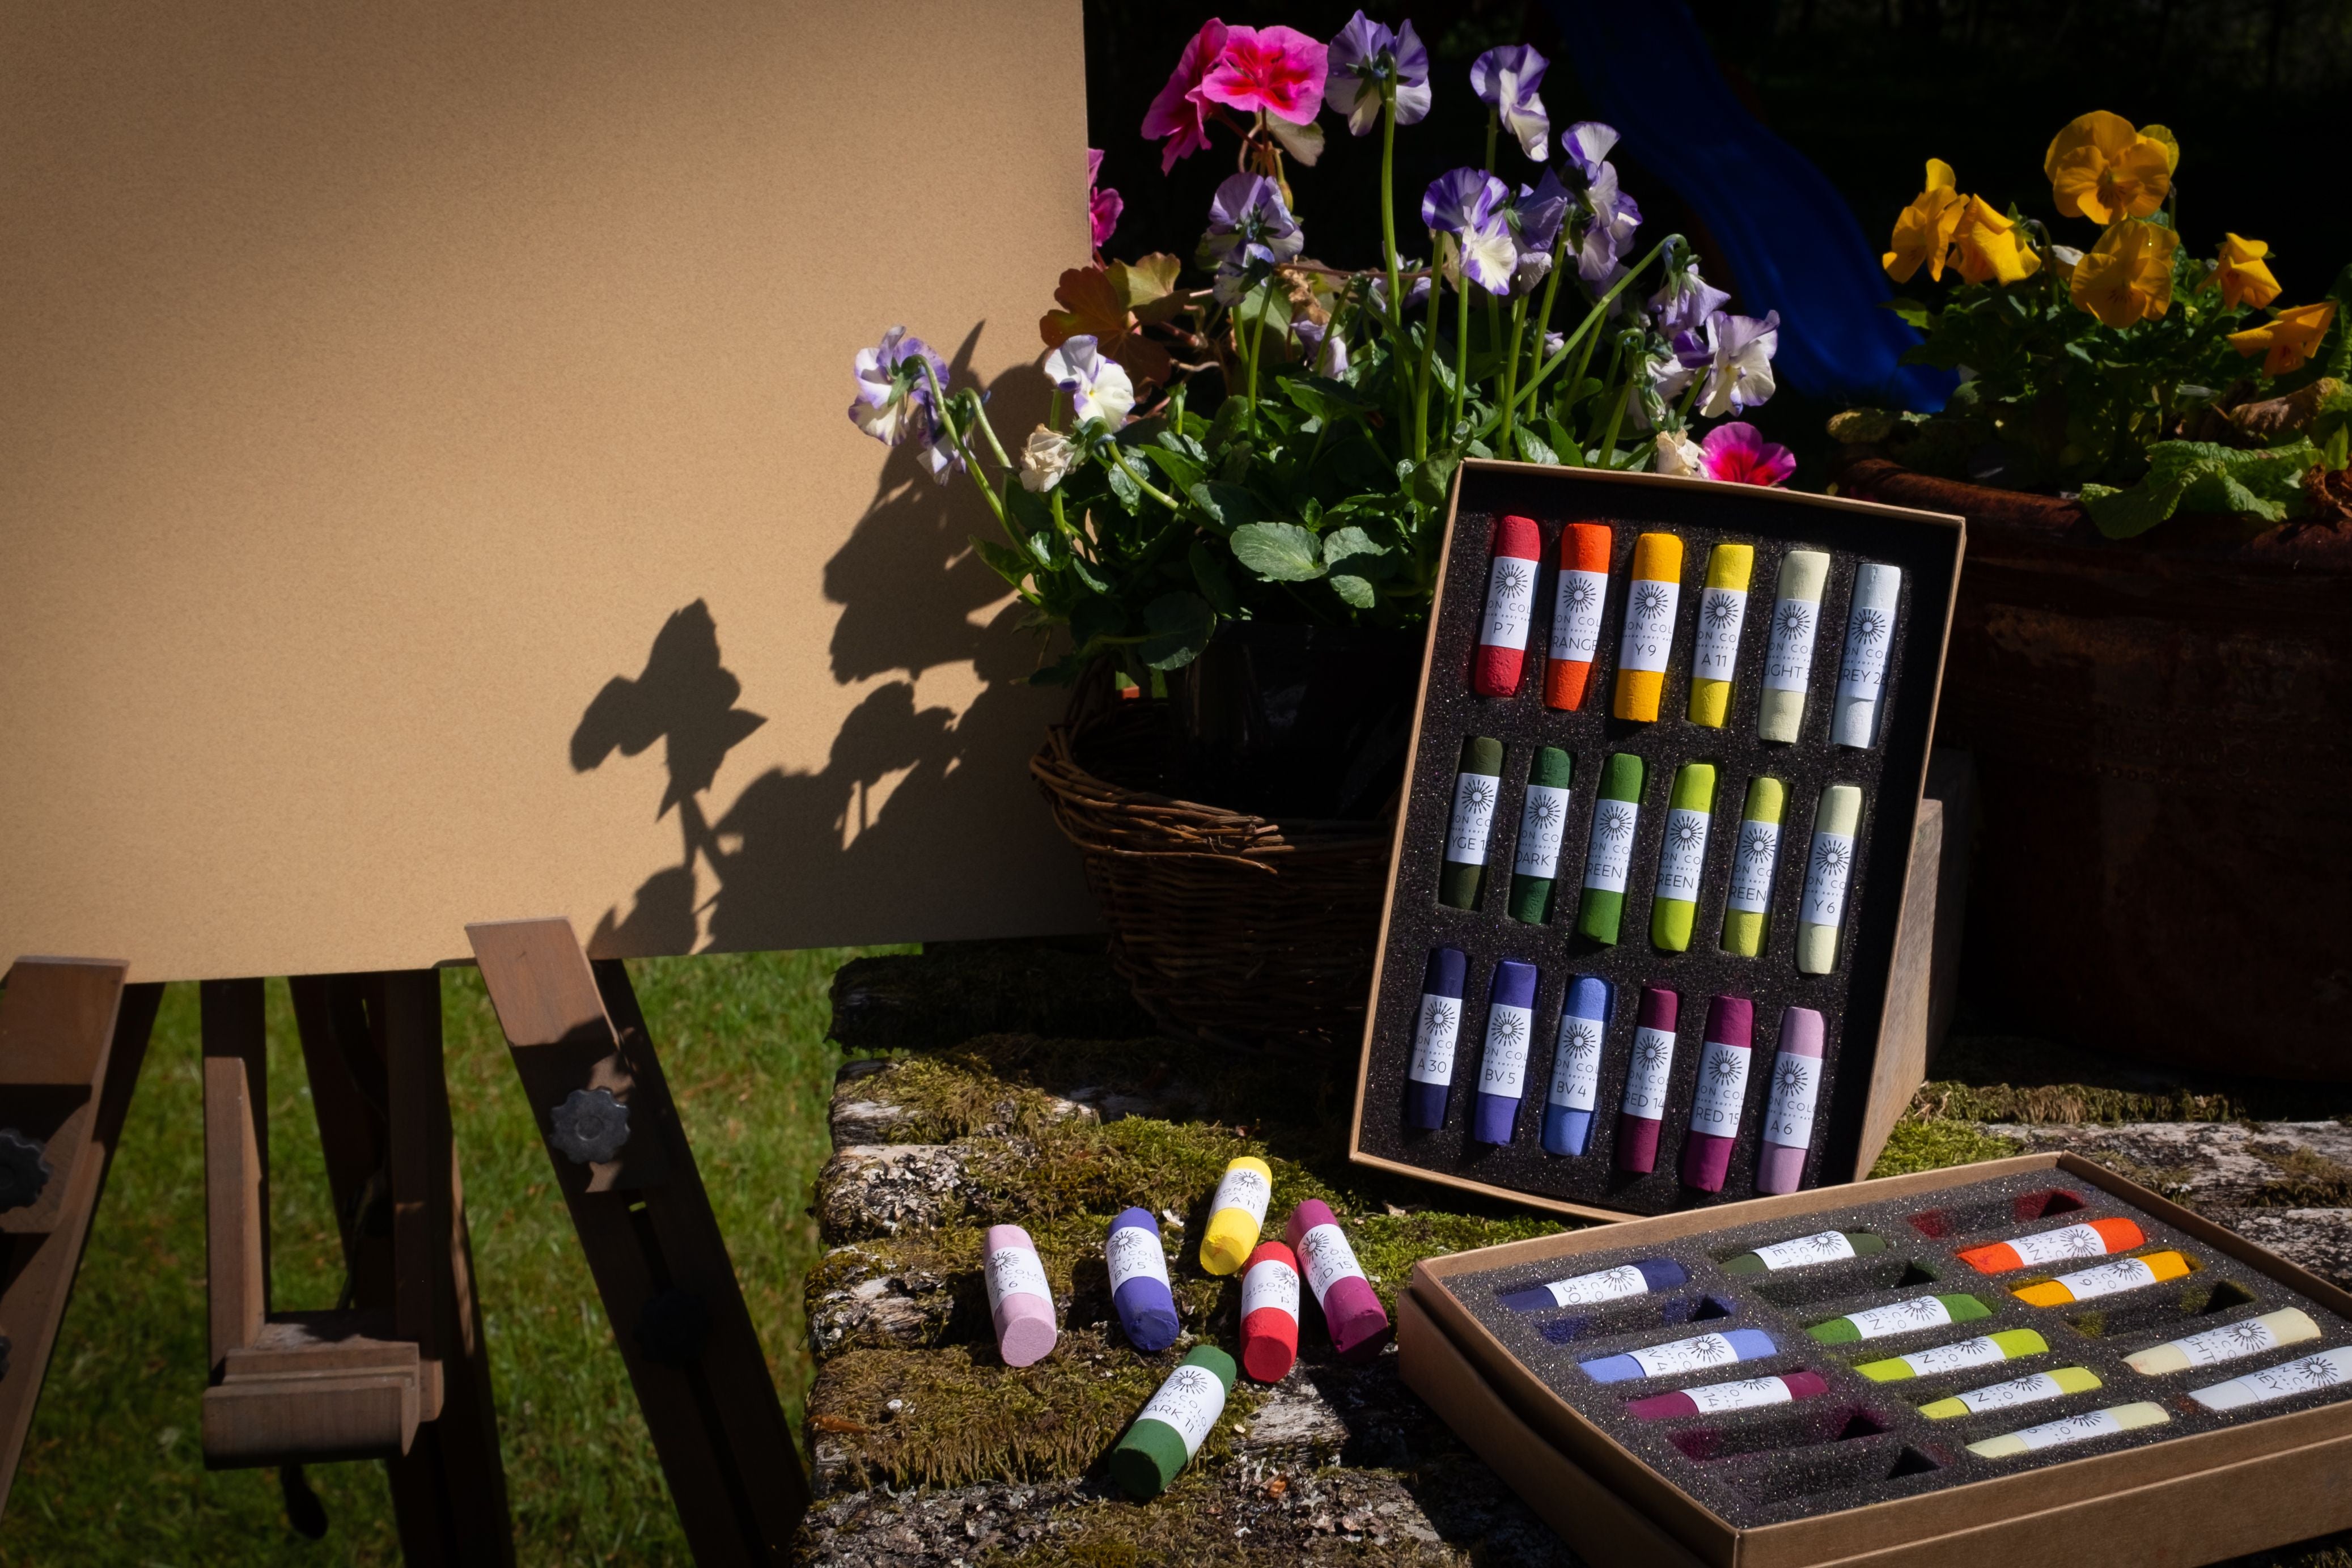 Unison Soft Pastels Special Edition Botanical 18 Colour set was created by the colour experts in Unison Colour.